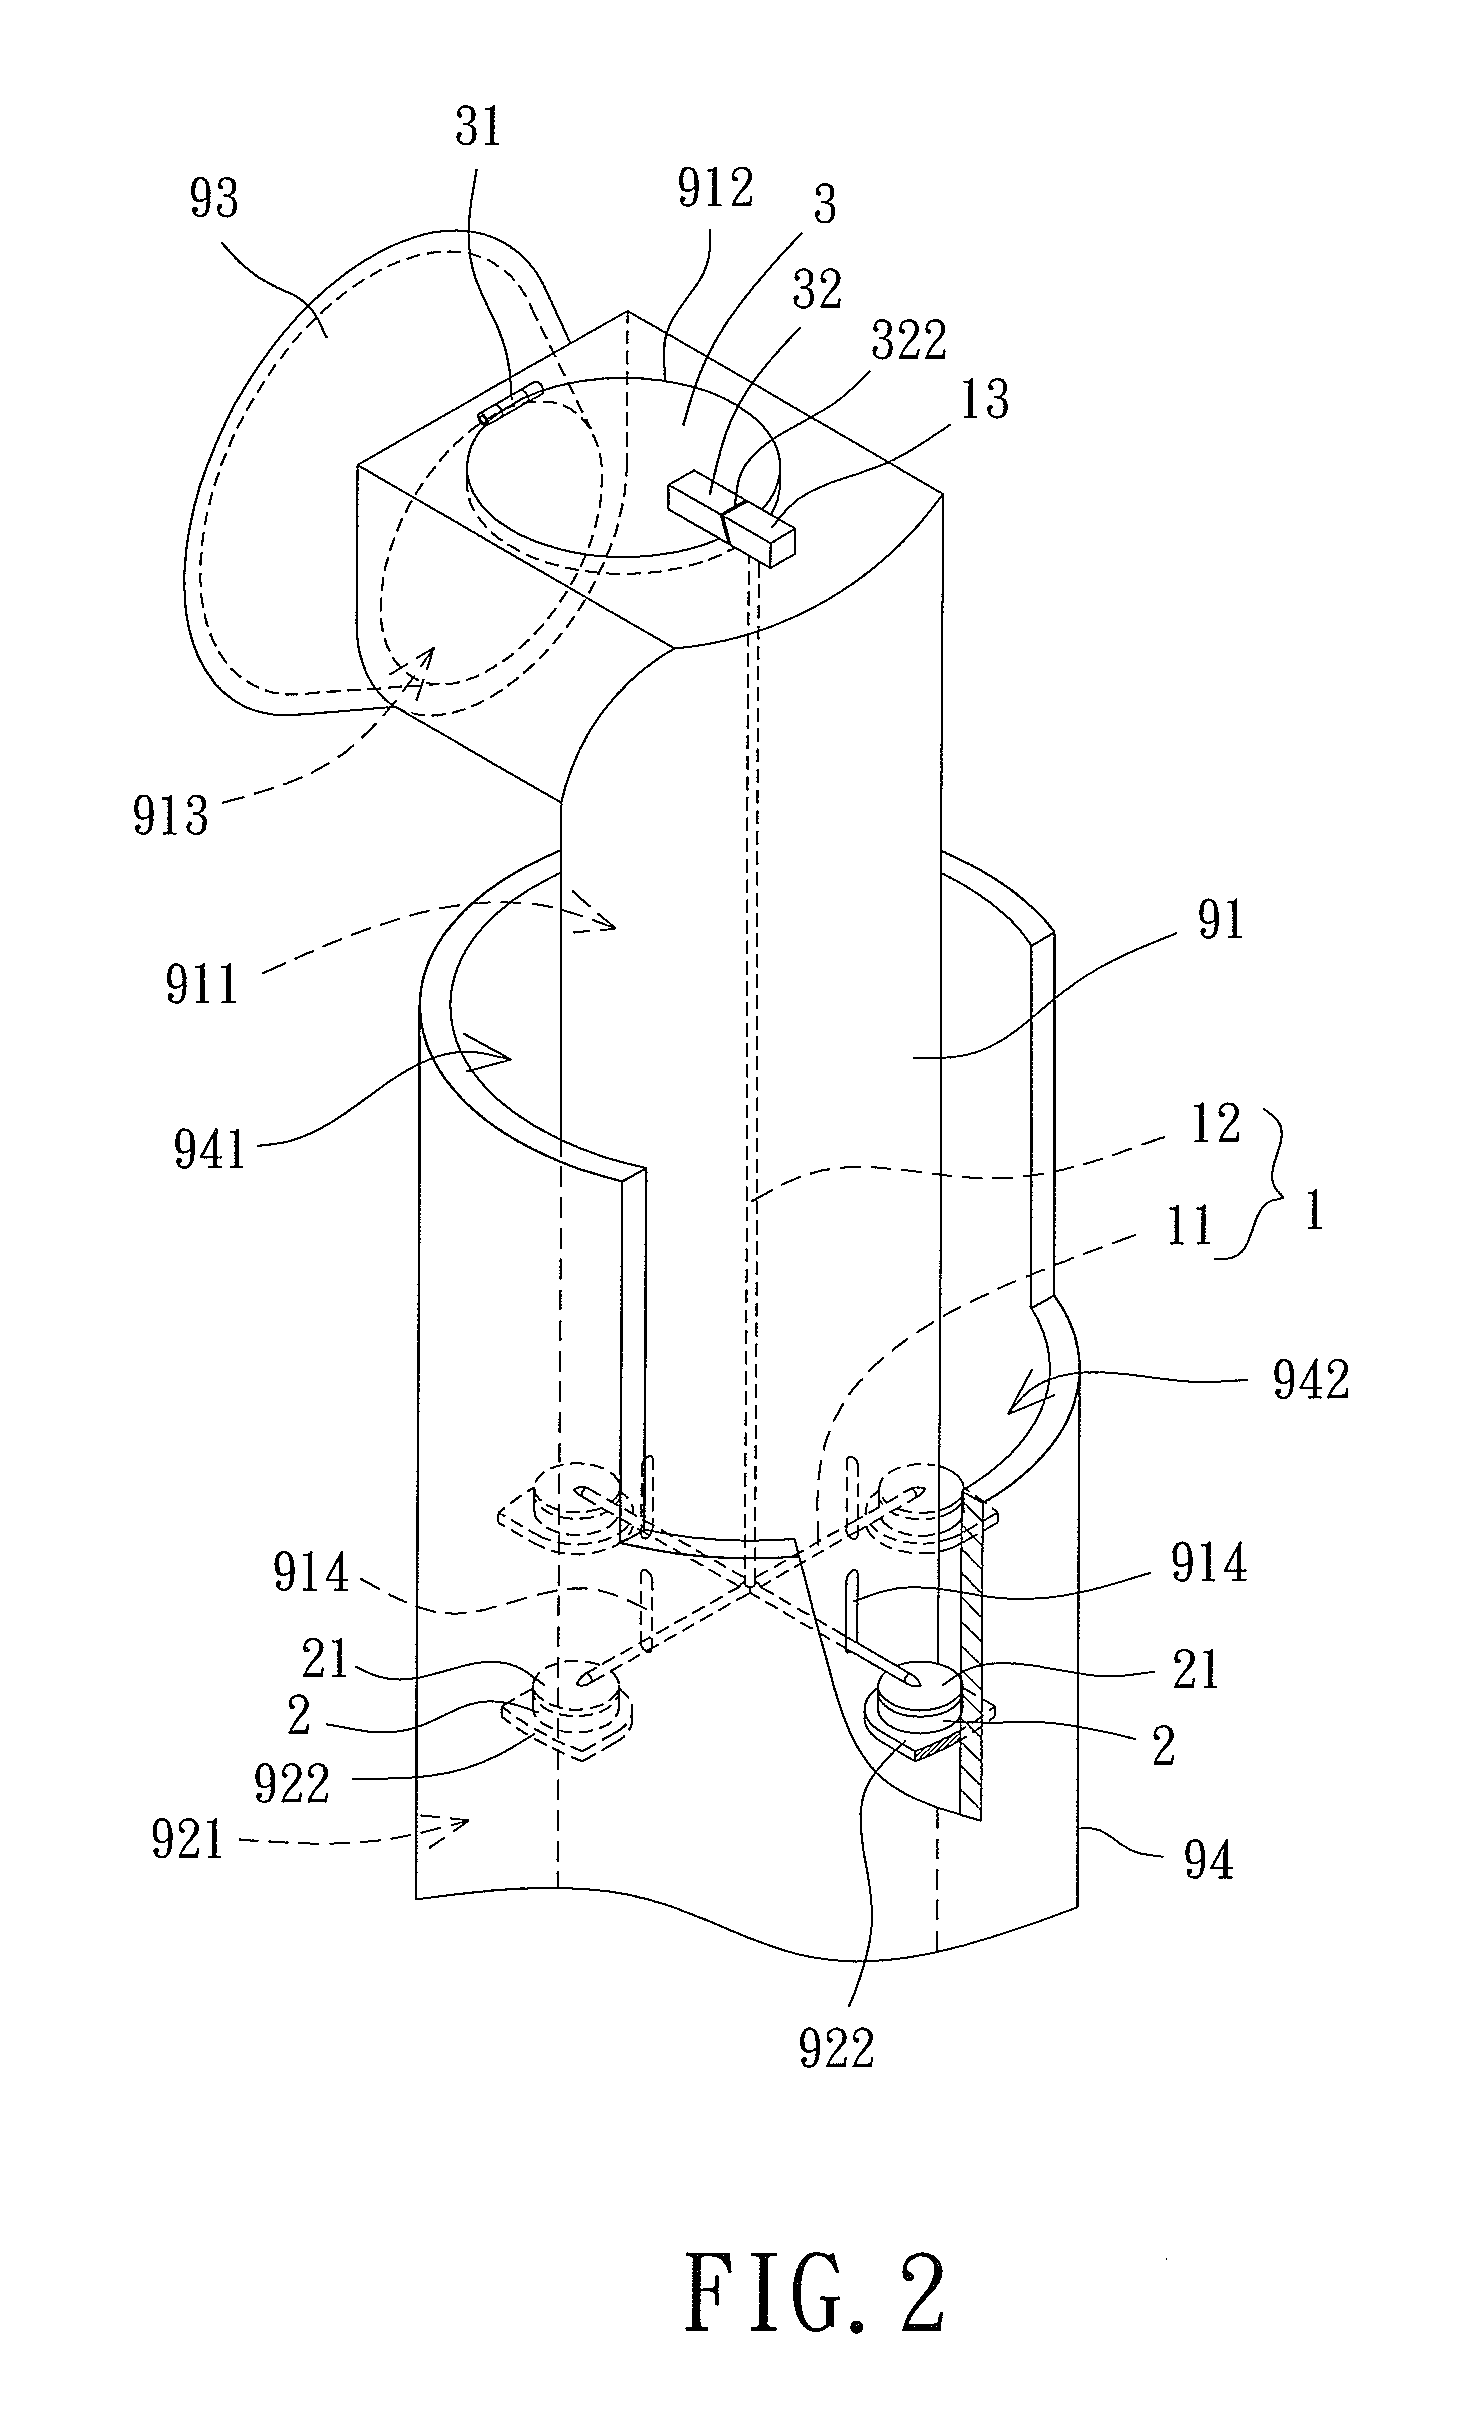 Ventilation system with controllable air input and output